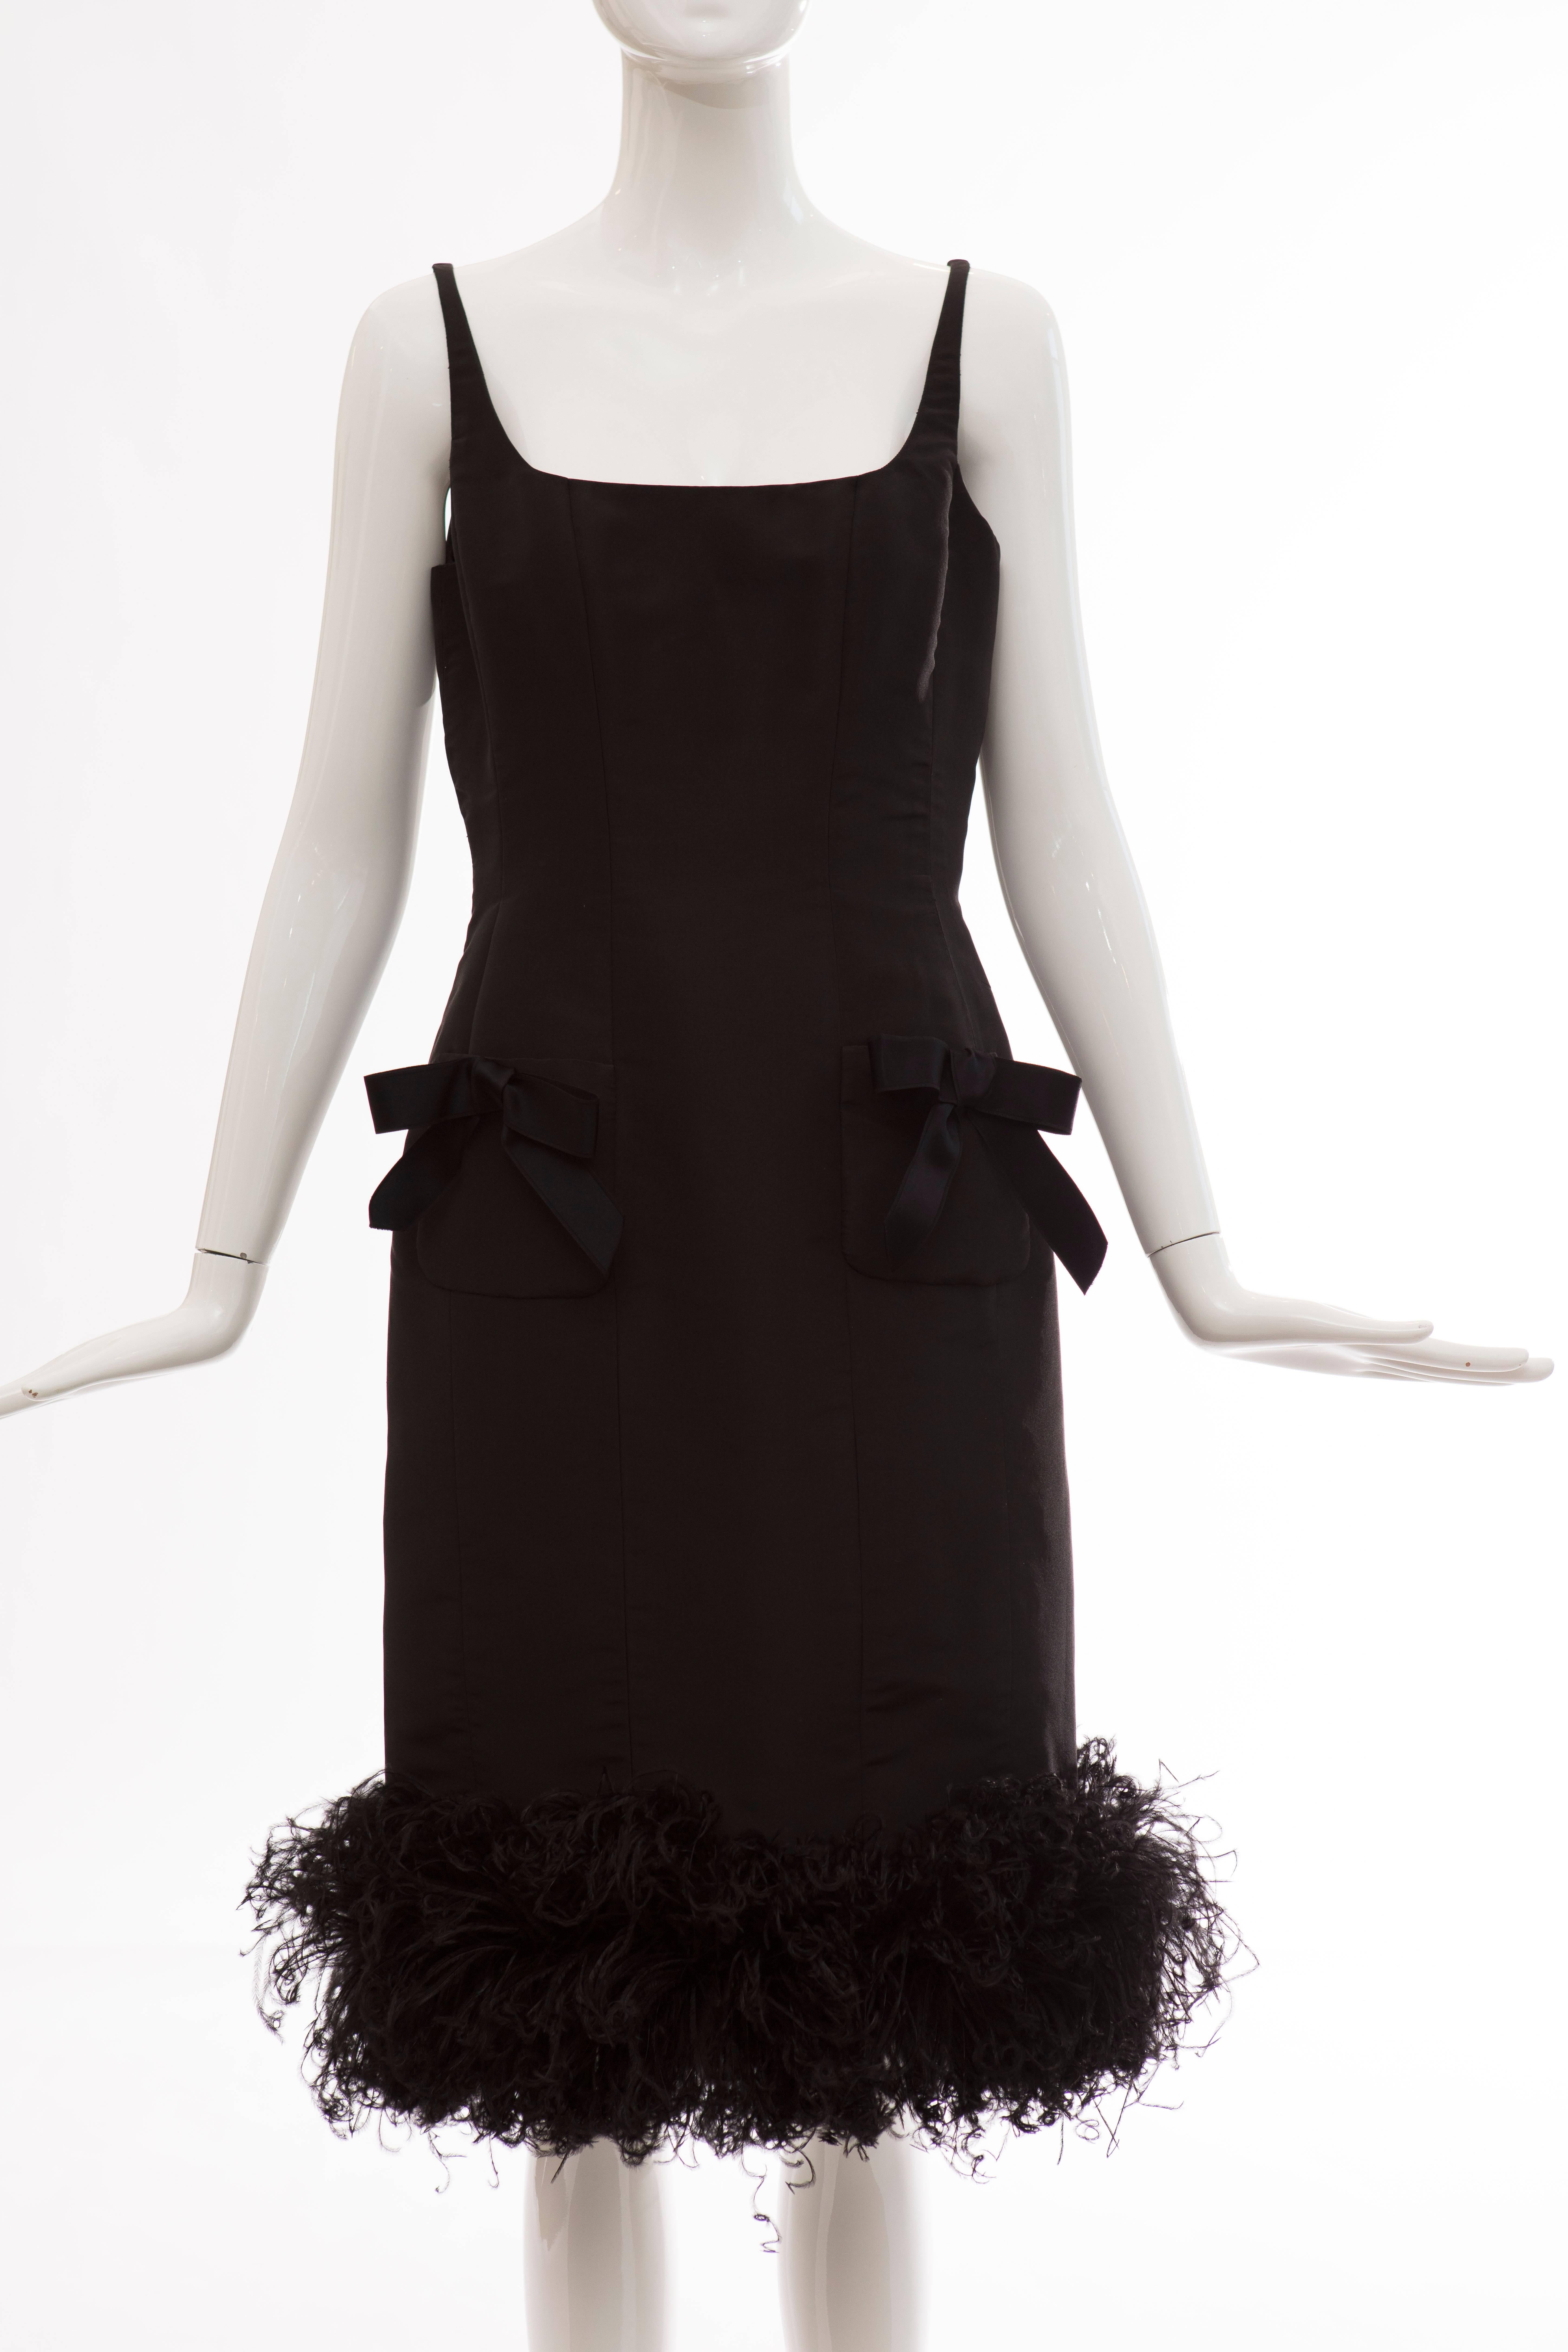 Oscar de la Renta, Runway Fall 2004, black silk faille sleeveless dress with Ostrich feather hem, two patch front pockets with silk satin bows, back zip and hook-and-eye closure, fully lined in silk.

US. 8

Bust 34, Waist 32, Hips 38, Length 41